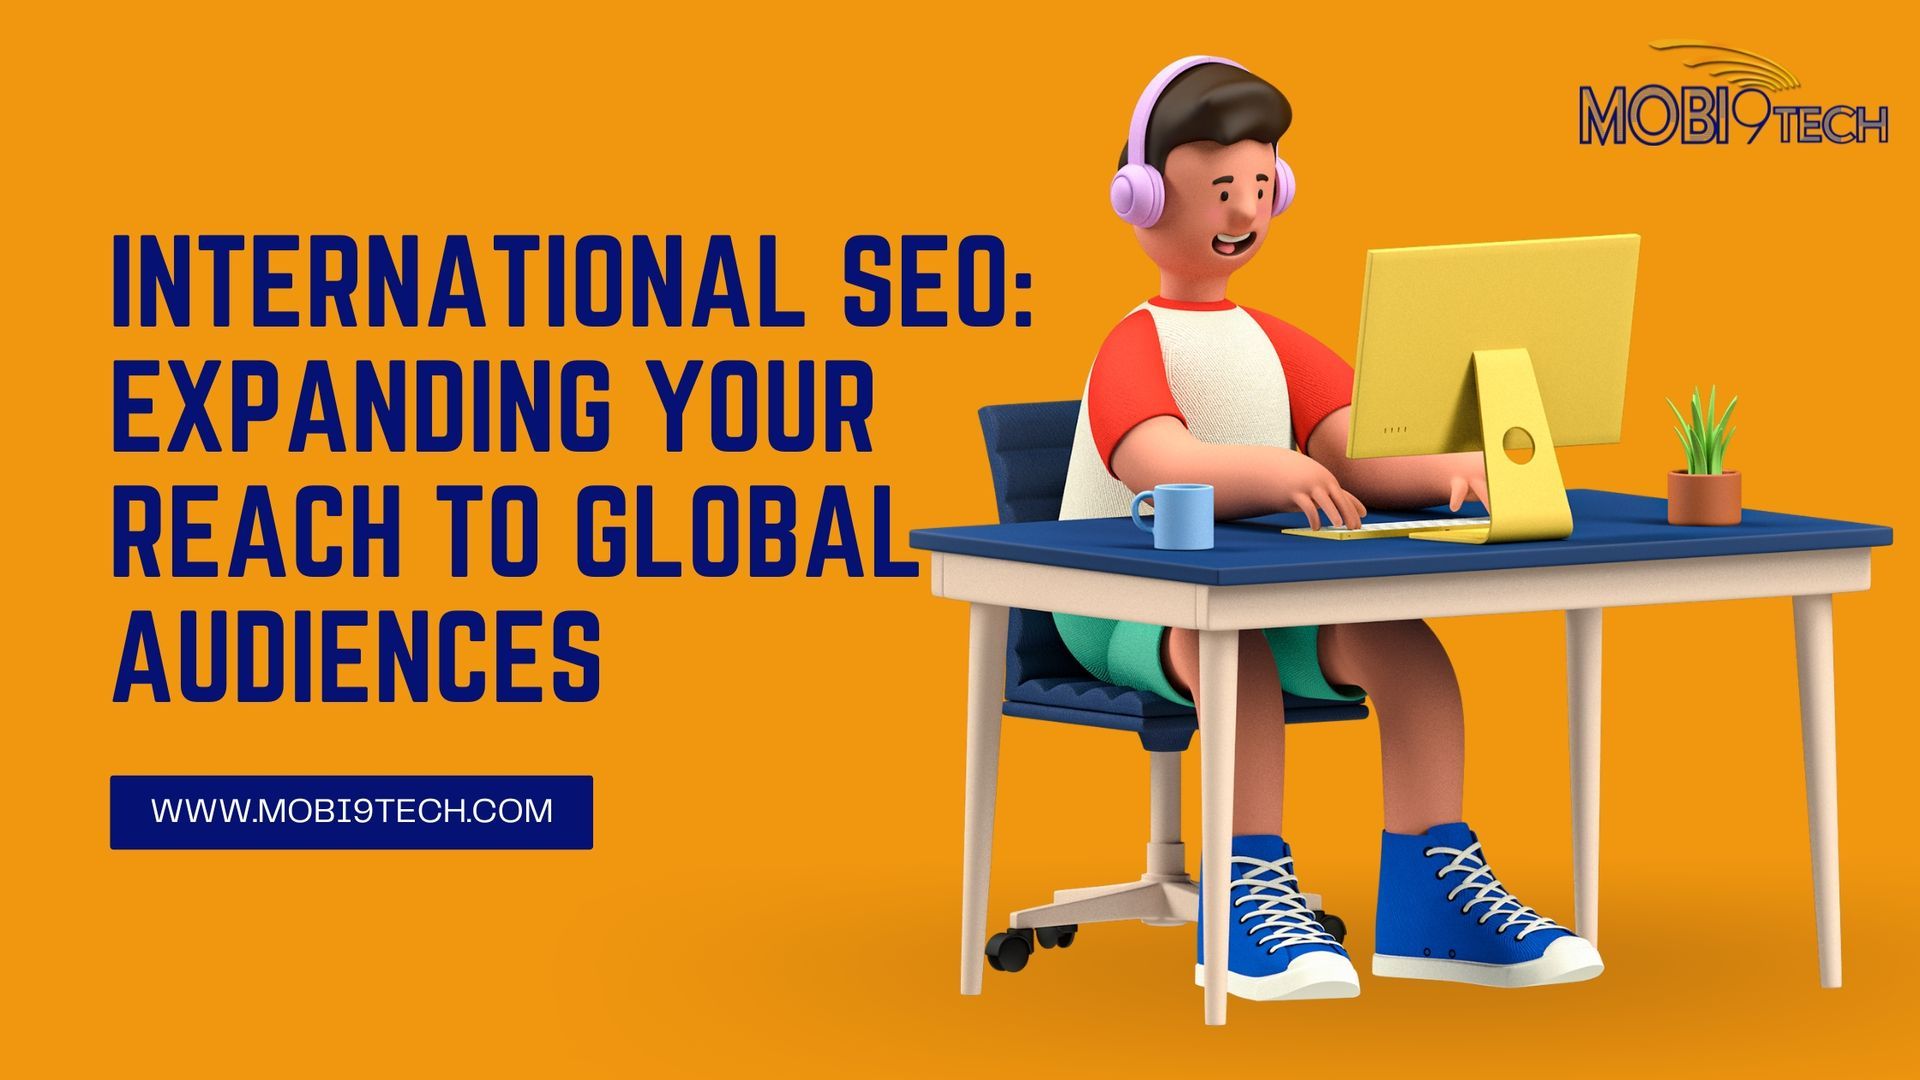 International SEO: Expanding Your Reach to Global Audiences